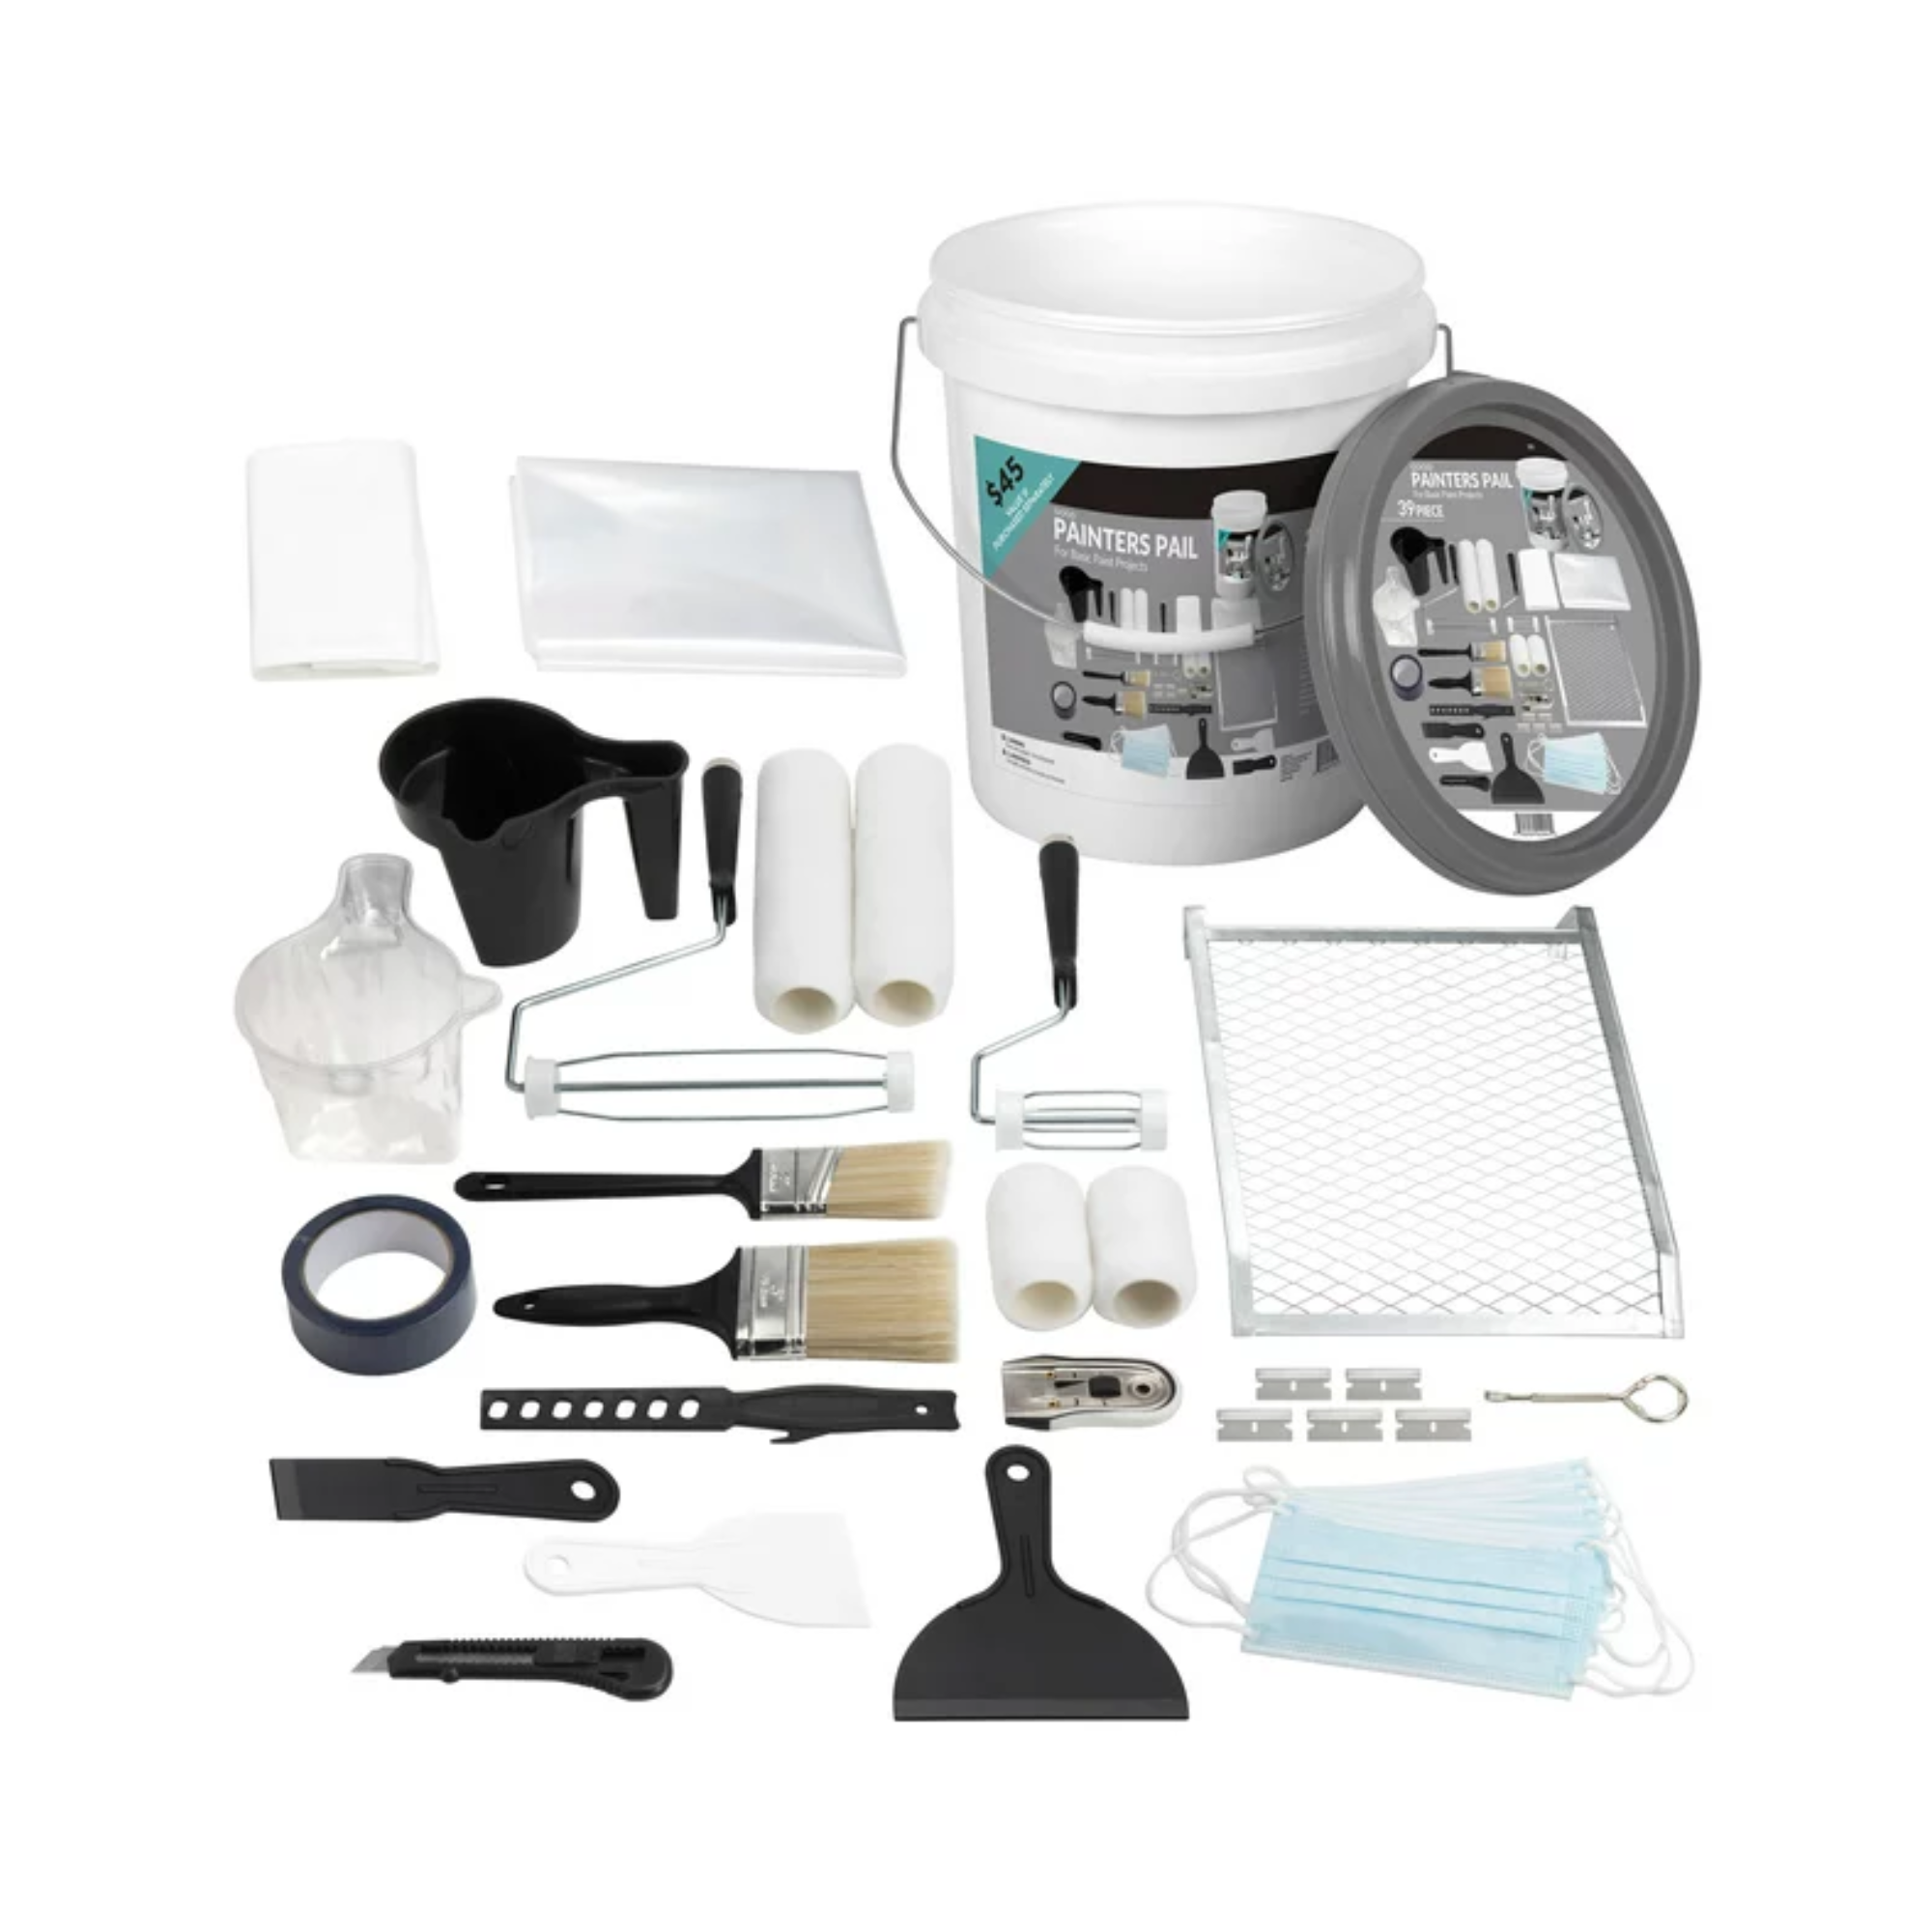 A painting set with rollers, brushes, buckets and more